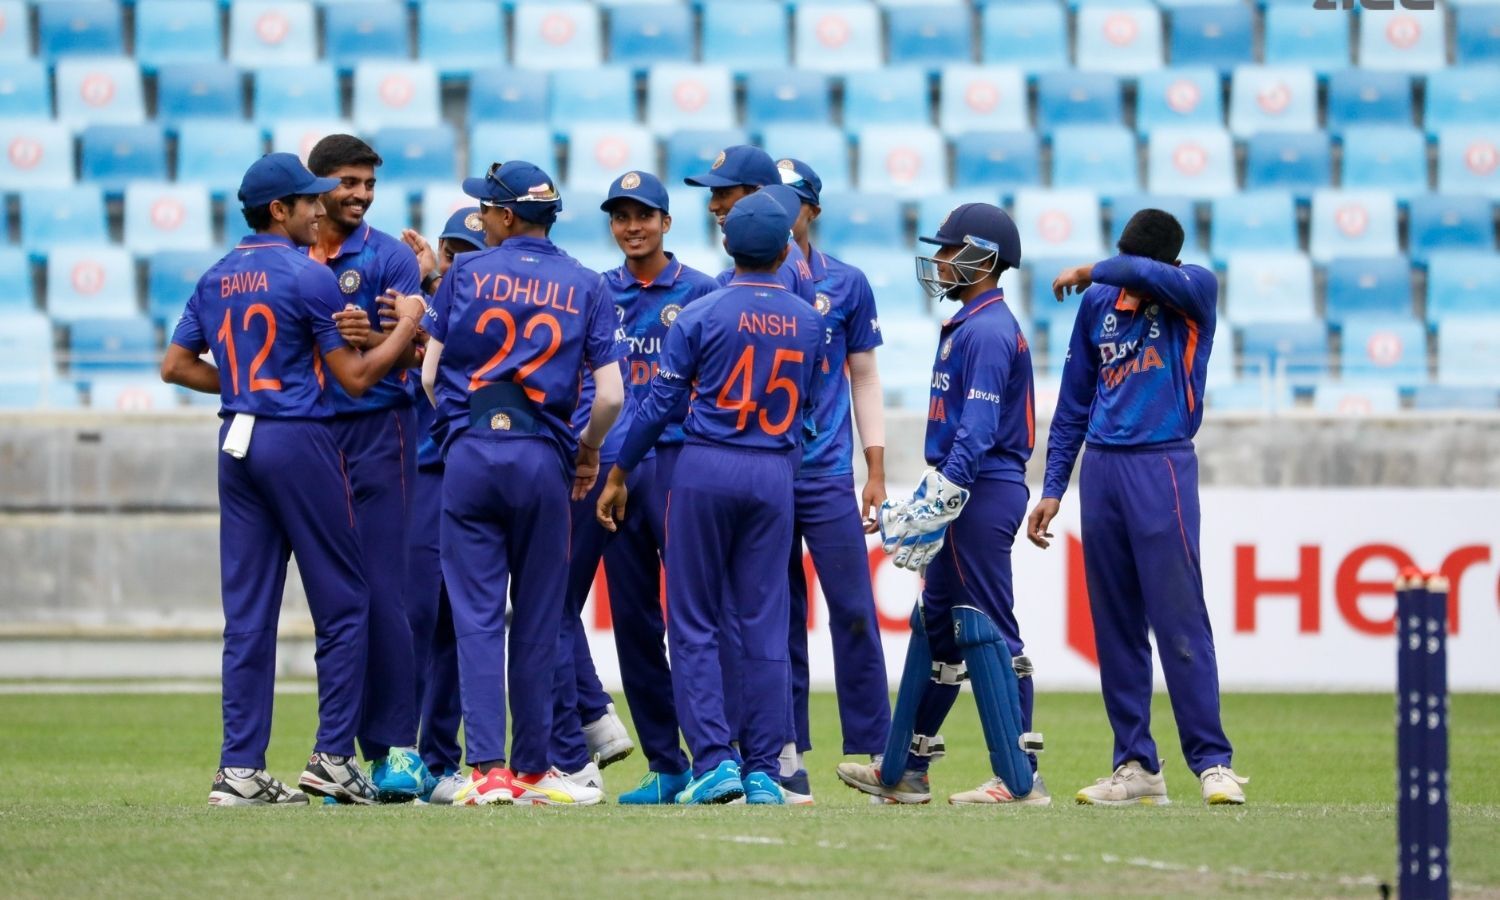 U19 World Cup India vs West Indies Warm-up Match